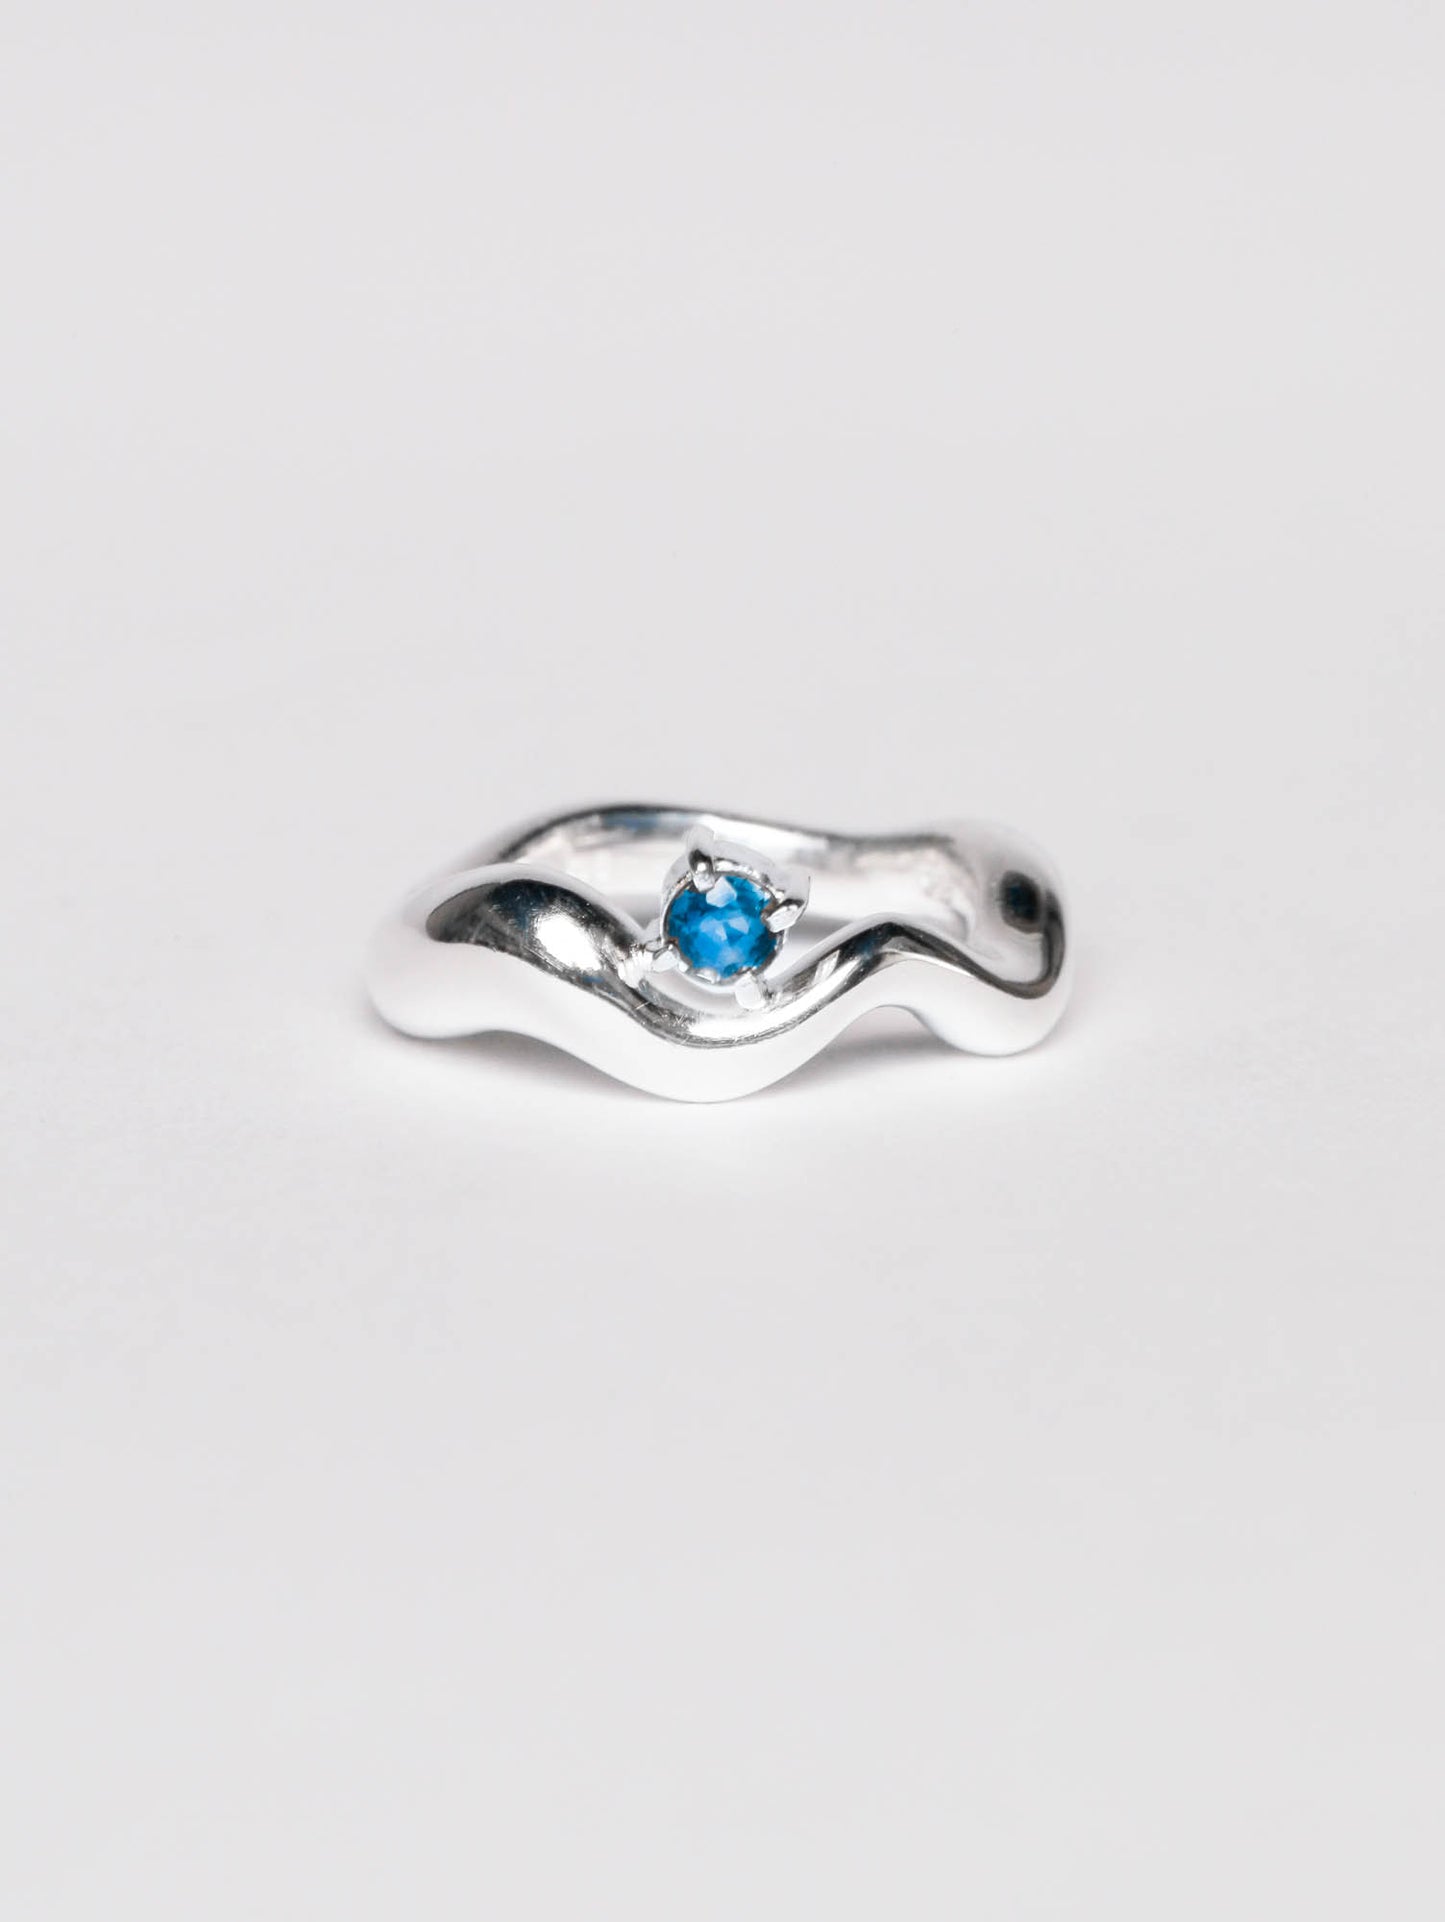 Wave Ring Silver with single Sapphire Stone # 1 | Size 6